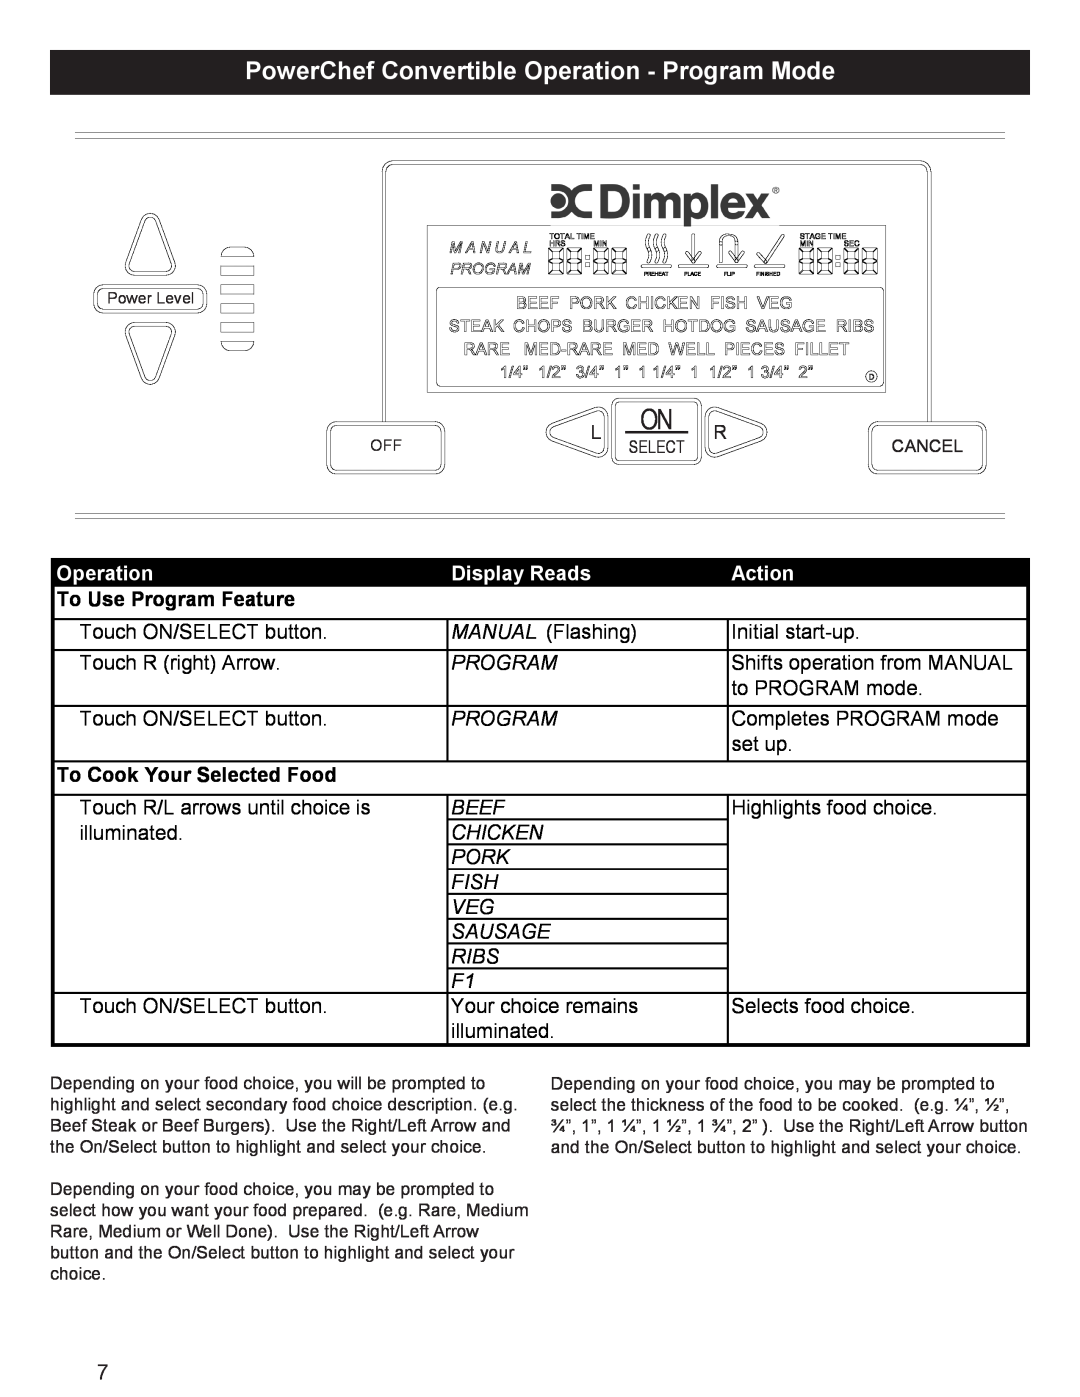 Dimplex CBQ-120-ELE PowerChef Convertible Operation - Program Mode, Display Reads, Action, To Use Program Feature 